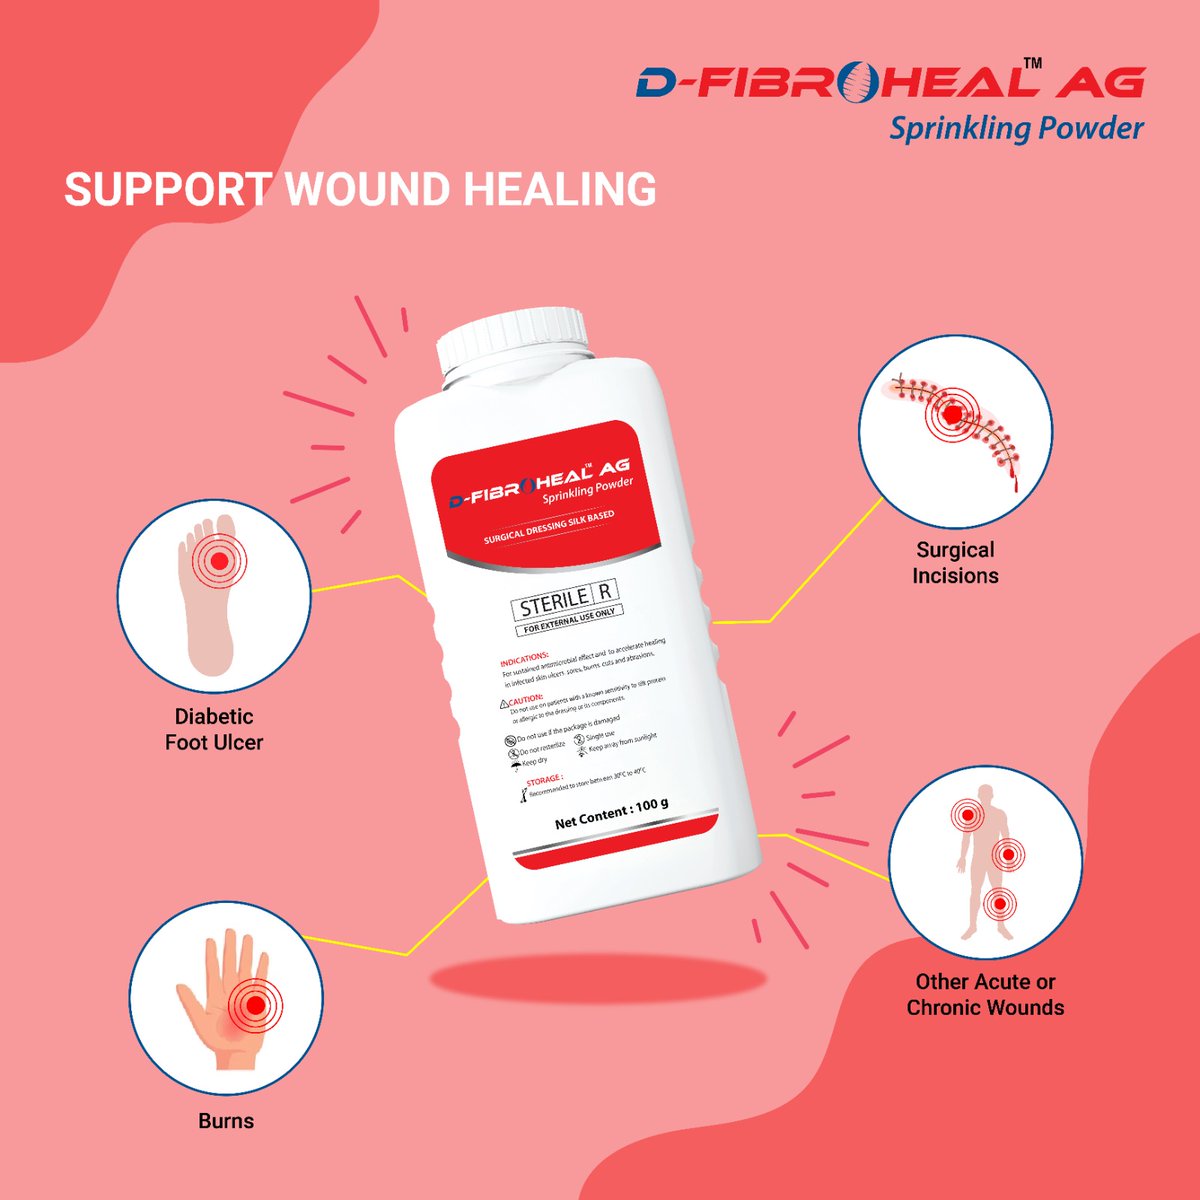 Join and support  us on this journey as we explore the boundless possibilities of silk protein in advancing wound care and improving patient outcomes. #SilkProtein #WoundCare #Innovation #Fibroheal #hospitals #heal #innovation #madeinindia #AatmaNirbharBharat